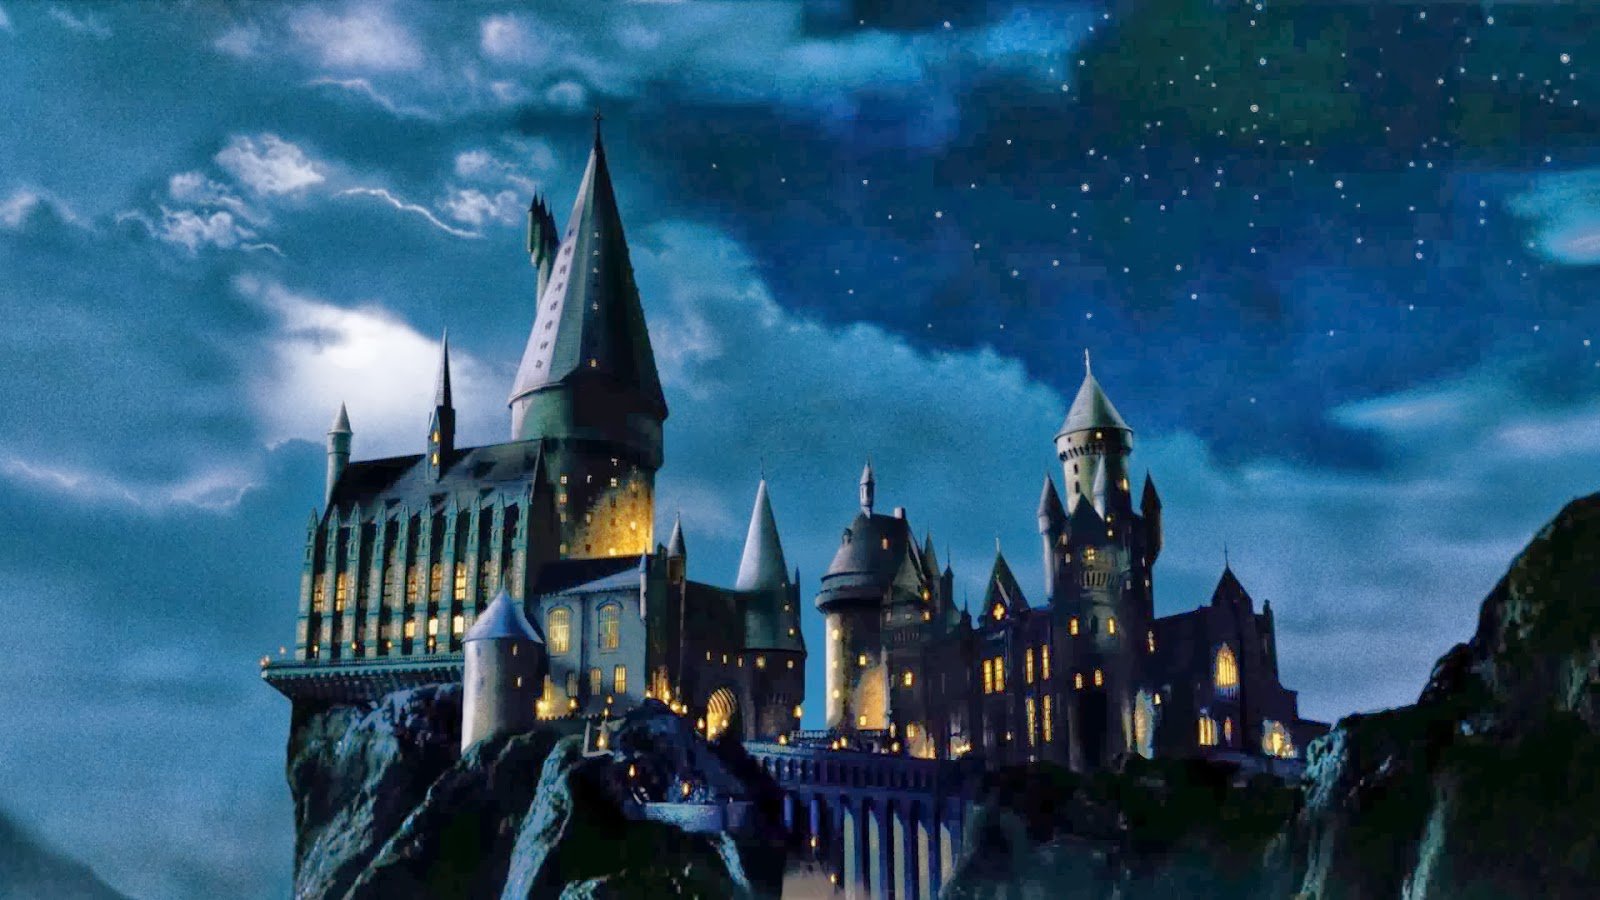 Hogwarts the school of witchcraft and wizardry made famous by Harry